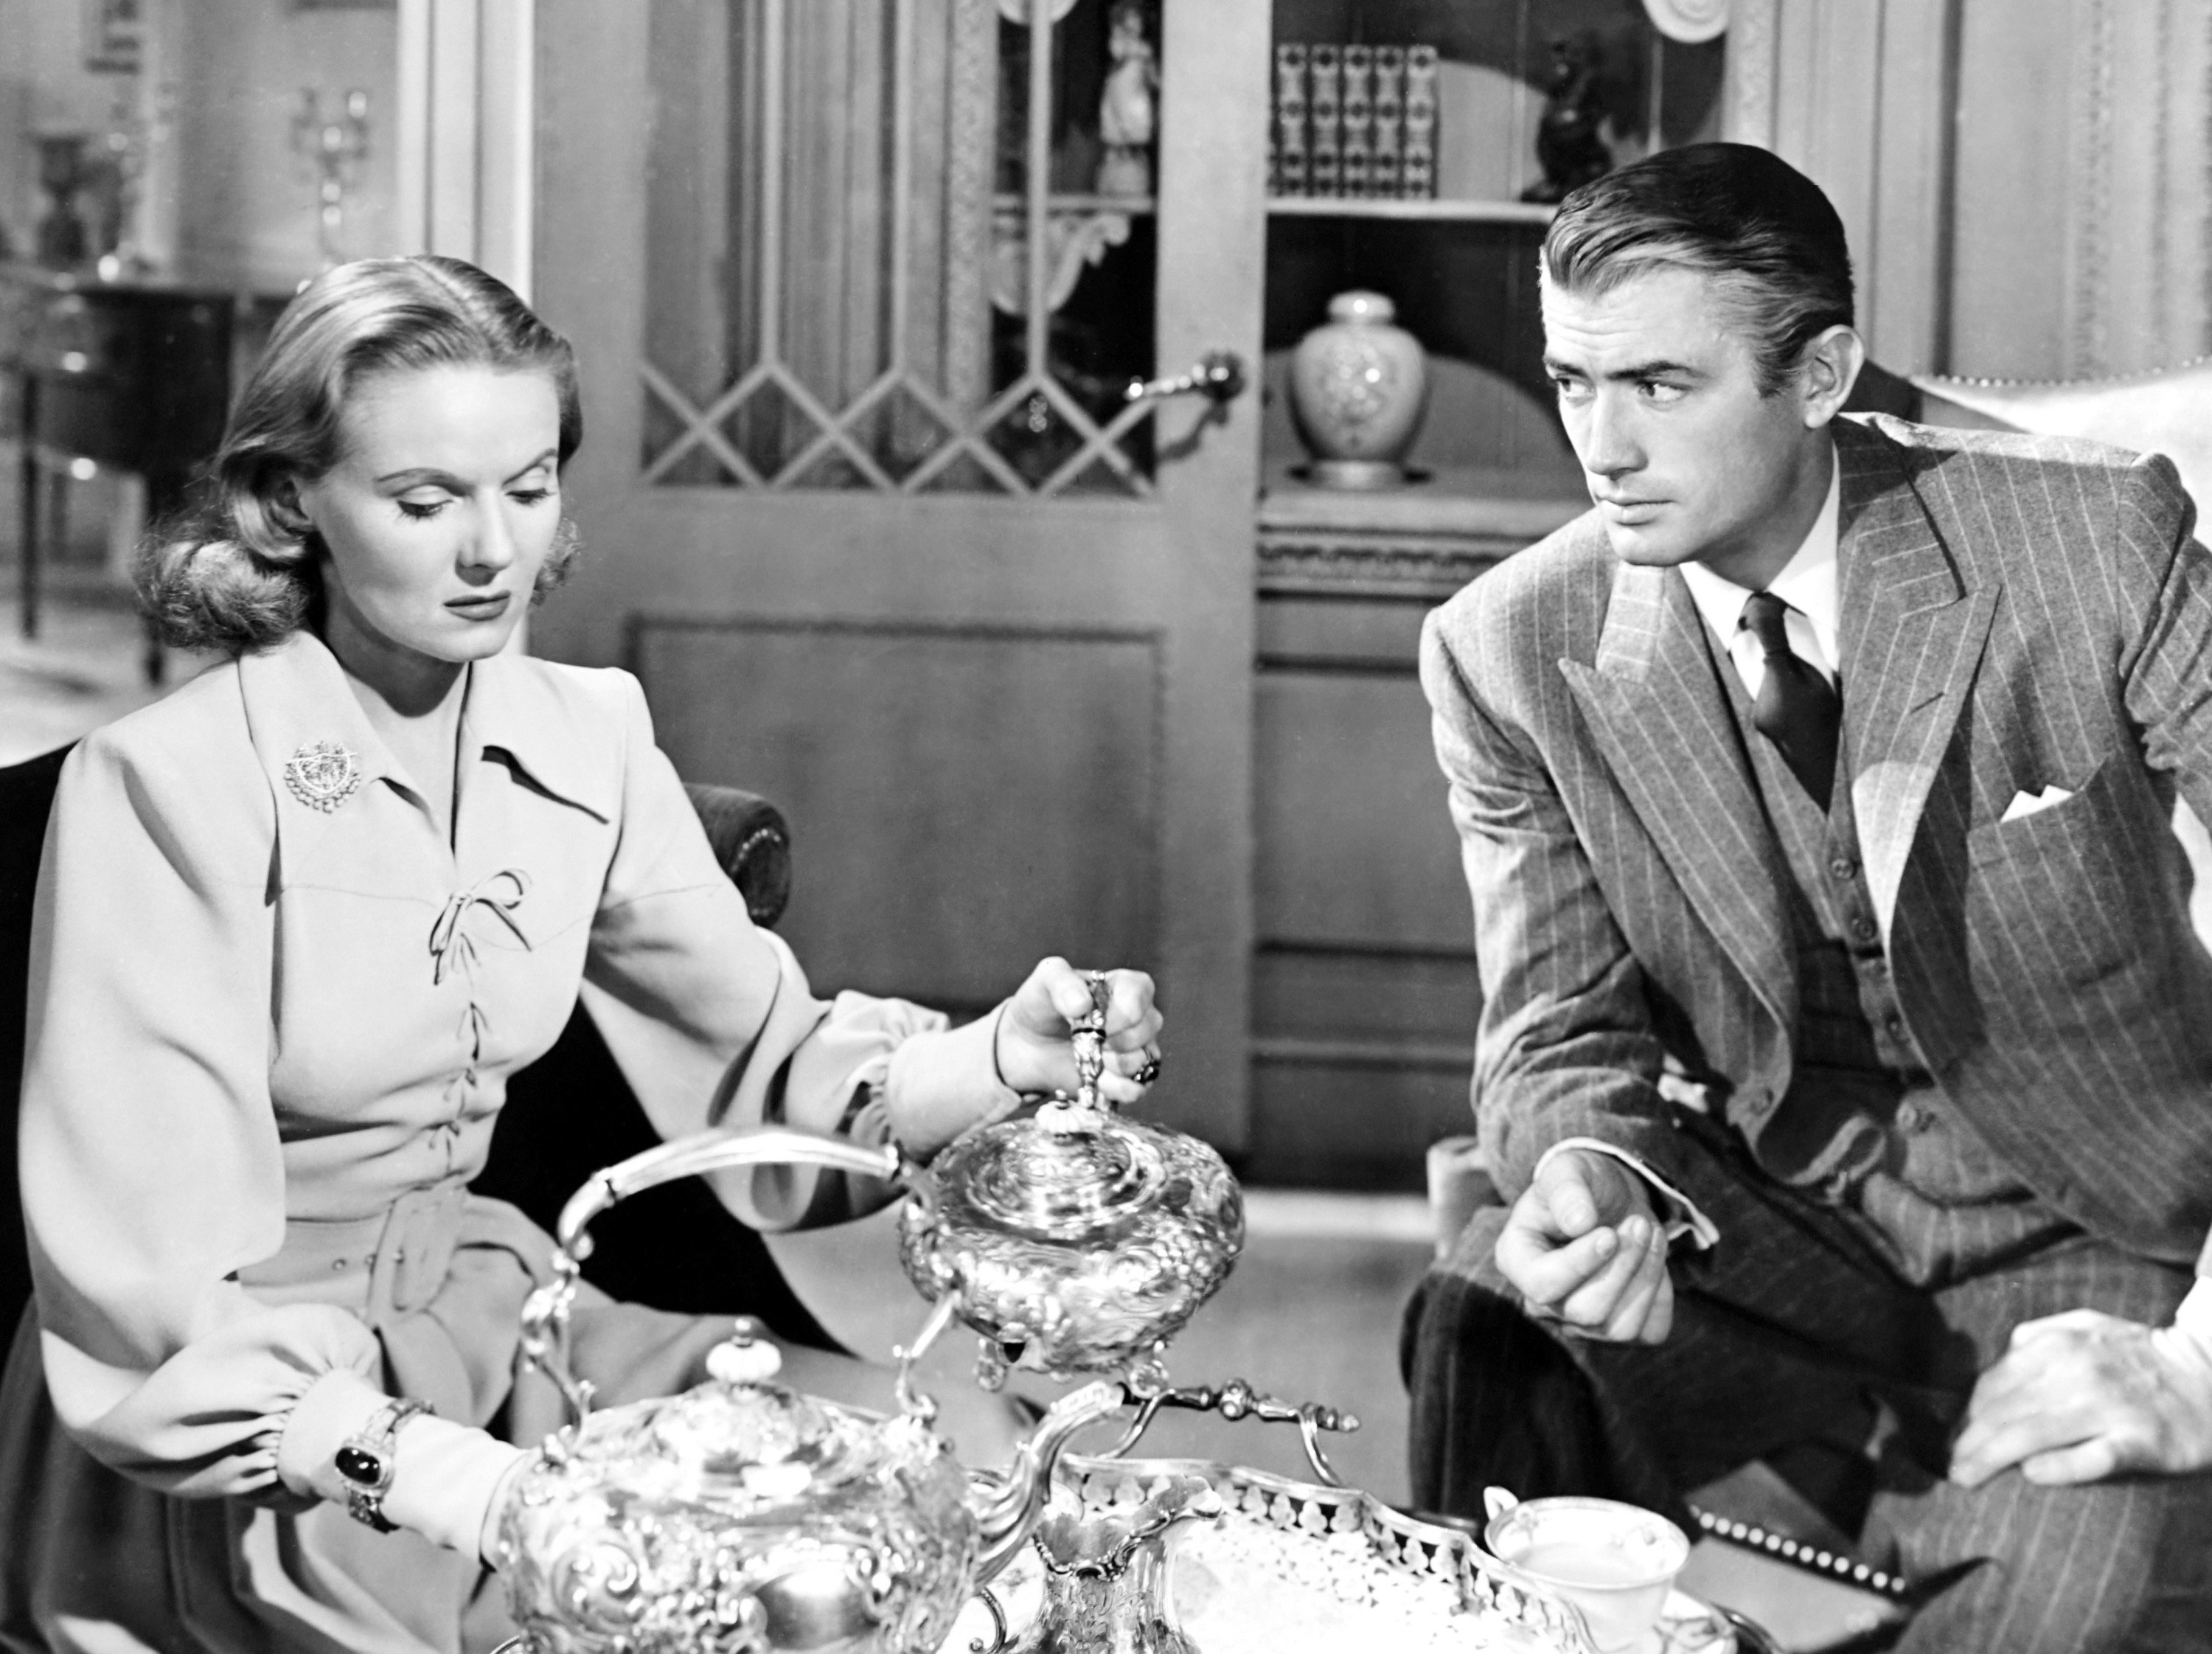 Ann Todd pouring tea while Gregory Peck stares at her.